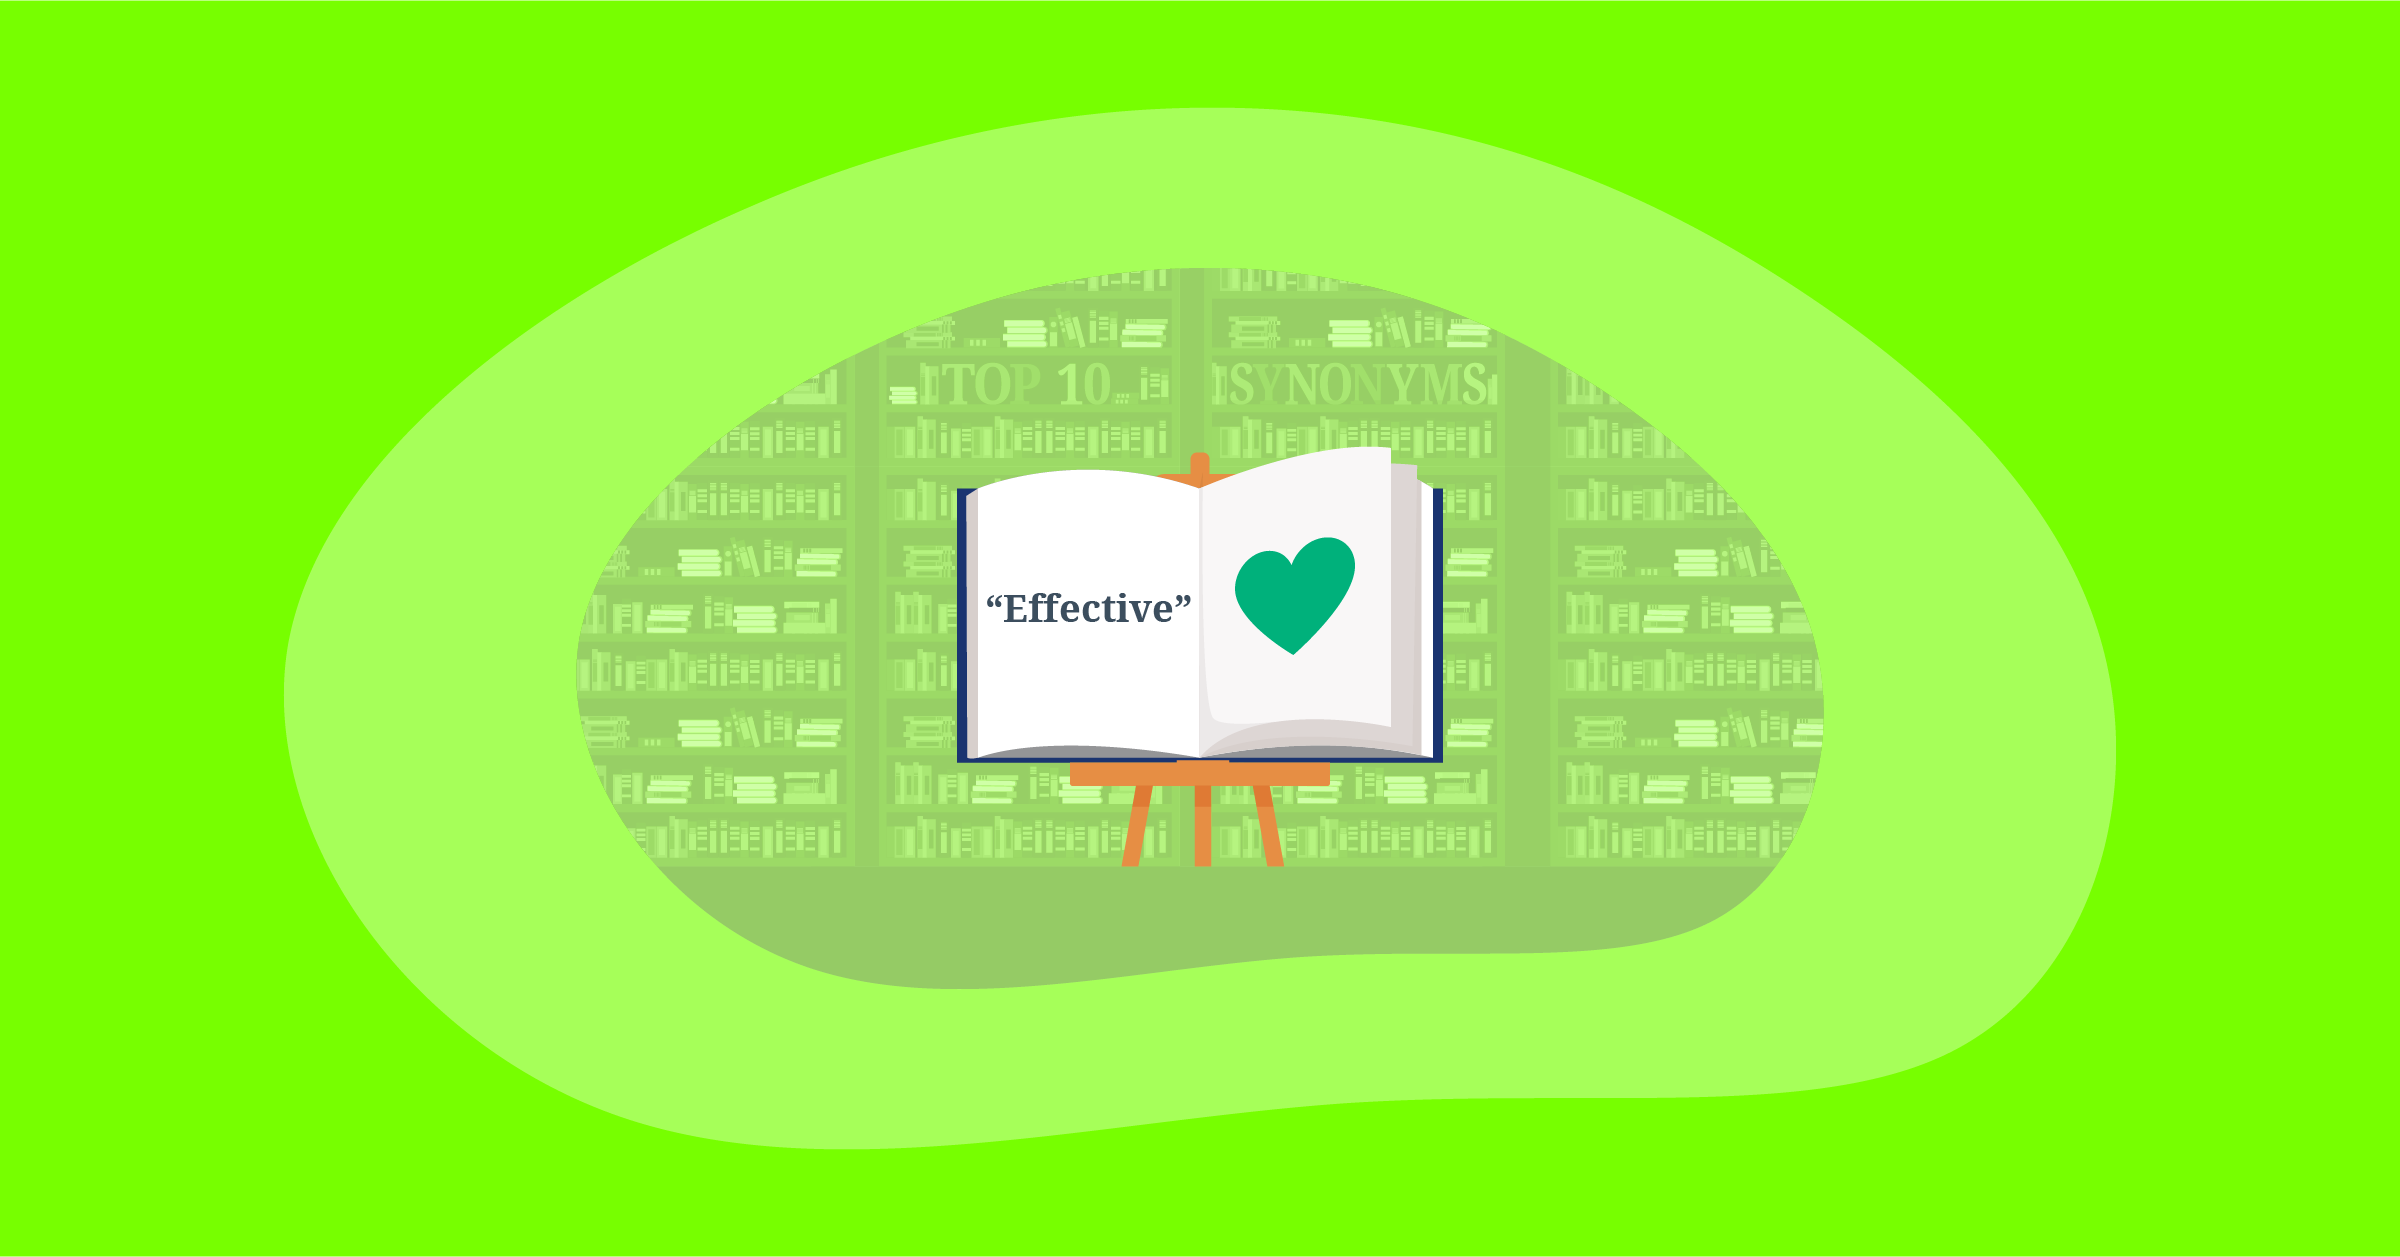 Illustration for Top 10 Positive & Impactful Synonyms for “Effective”